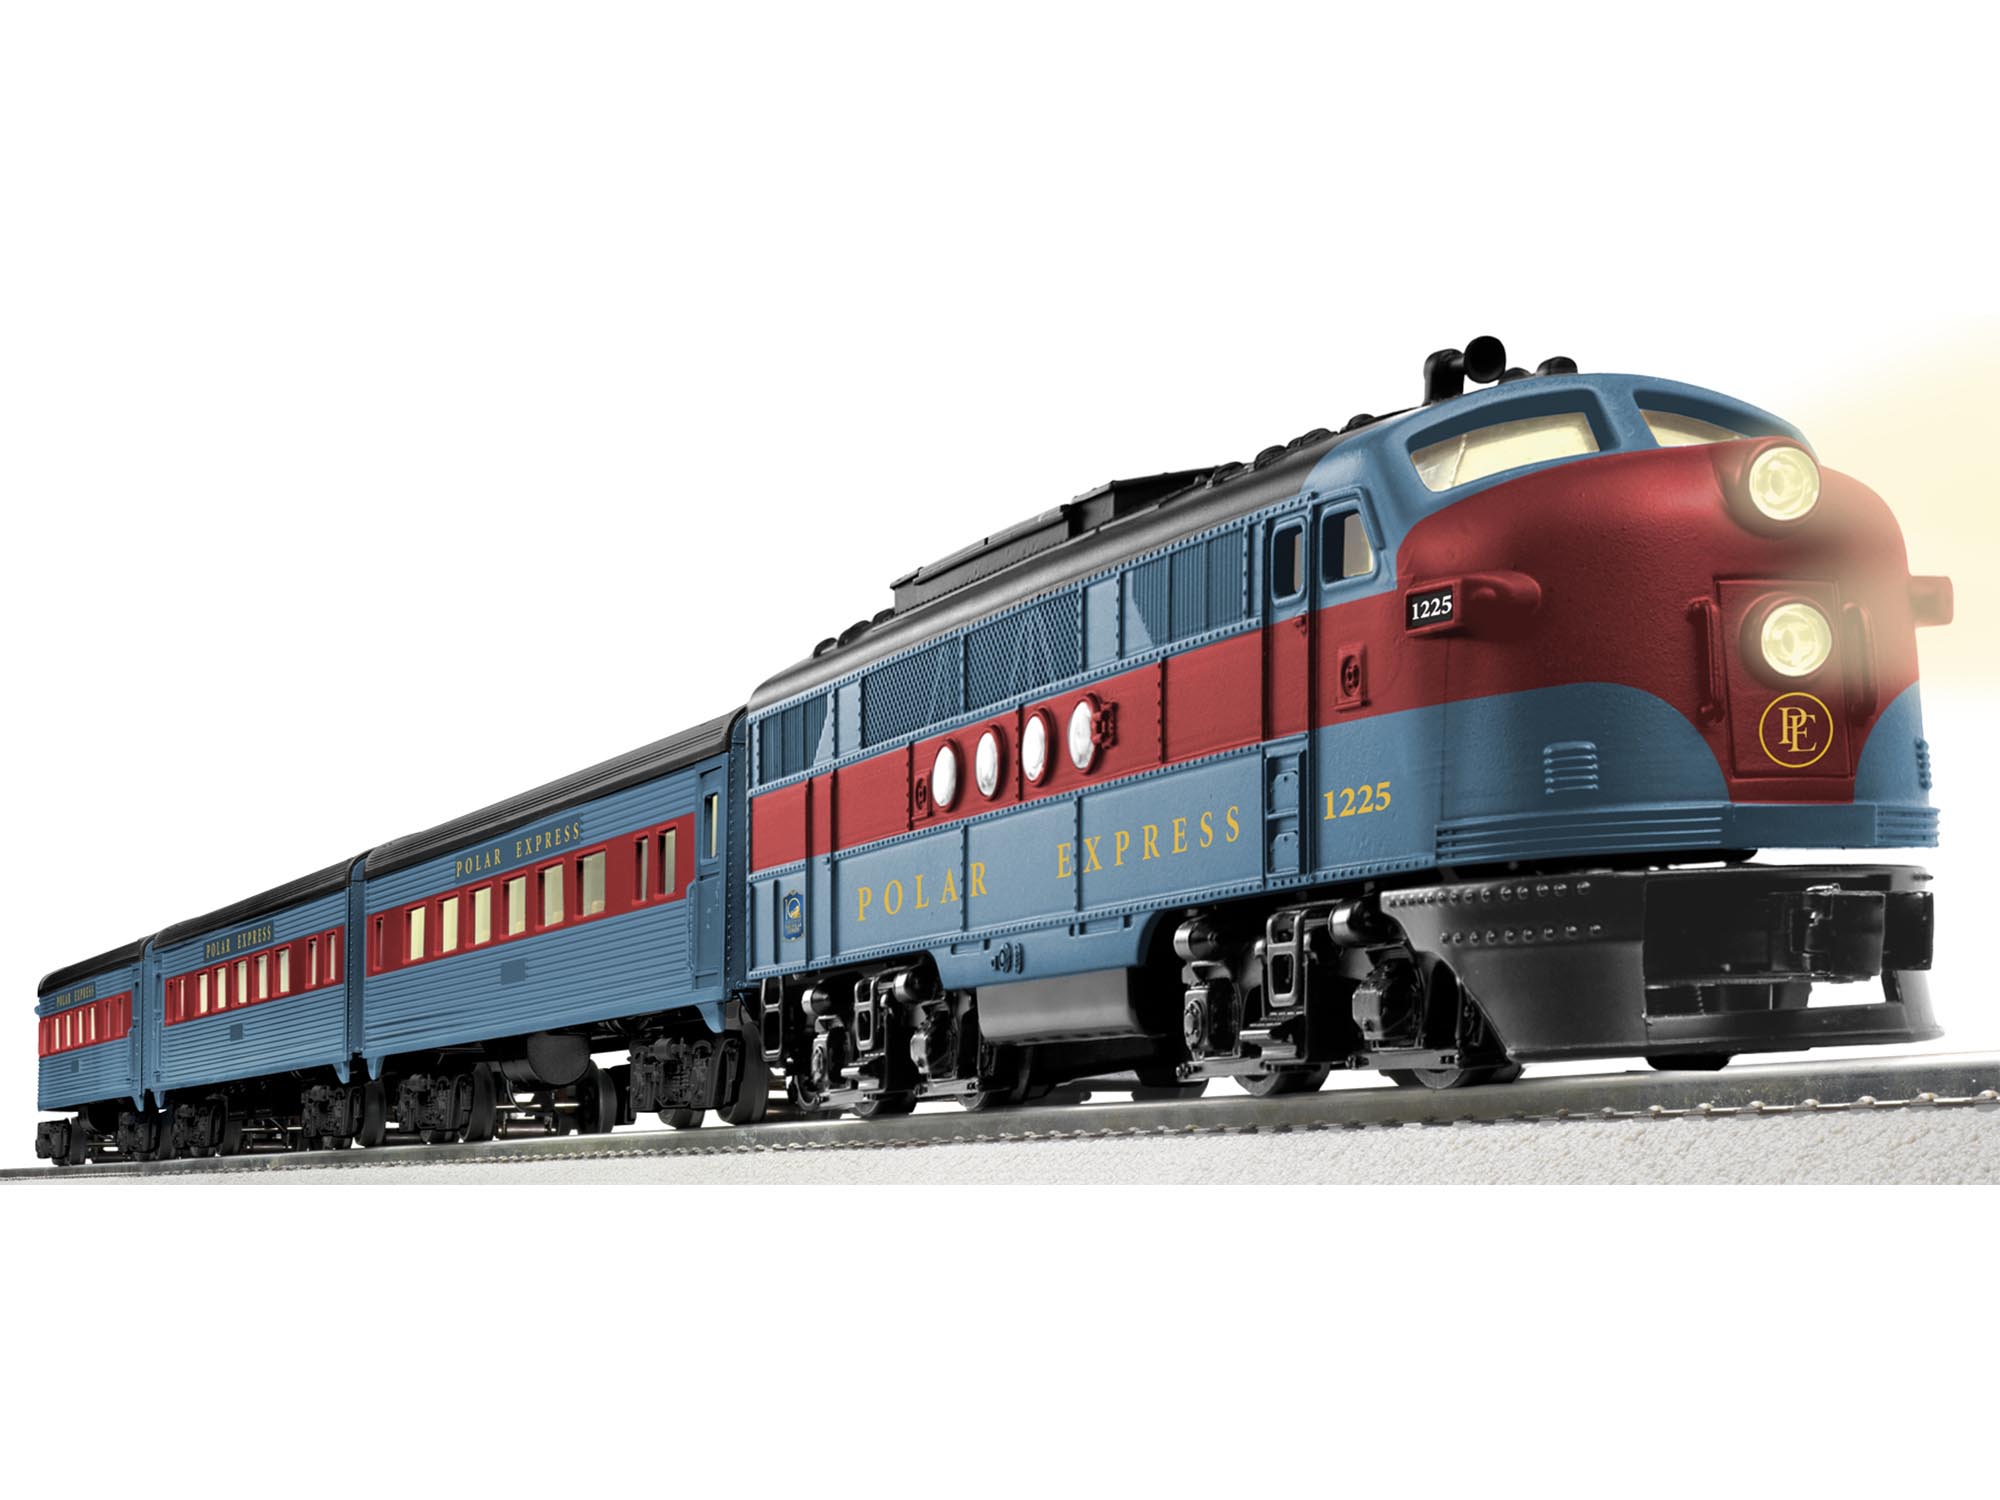 Electric Toy Model Train Sets At Lionel